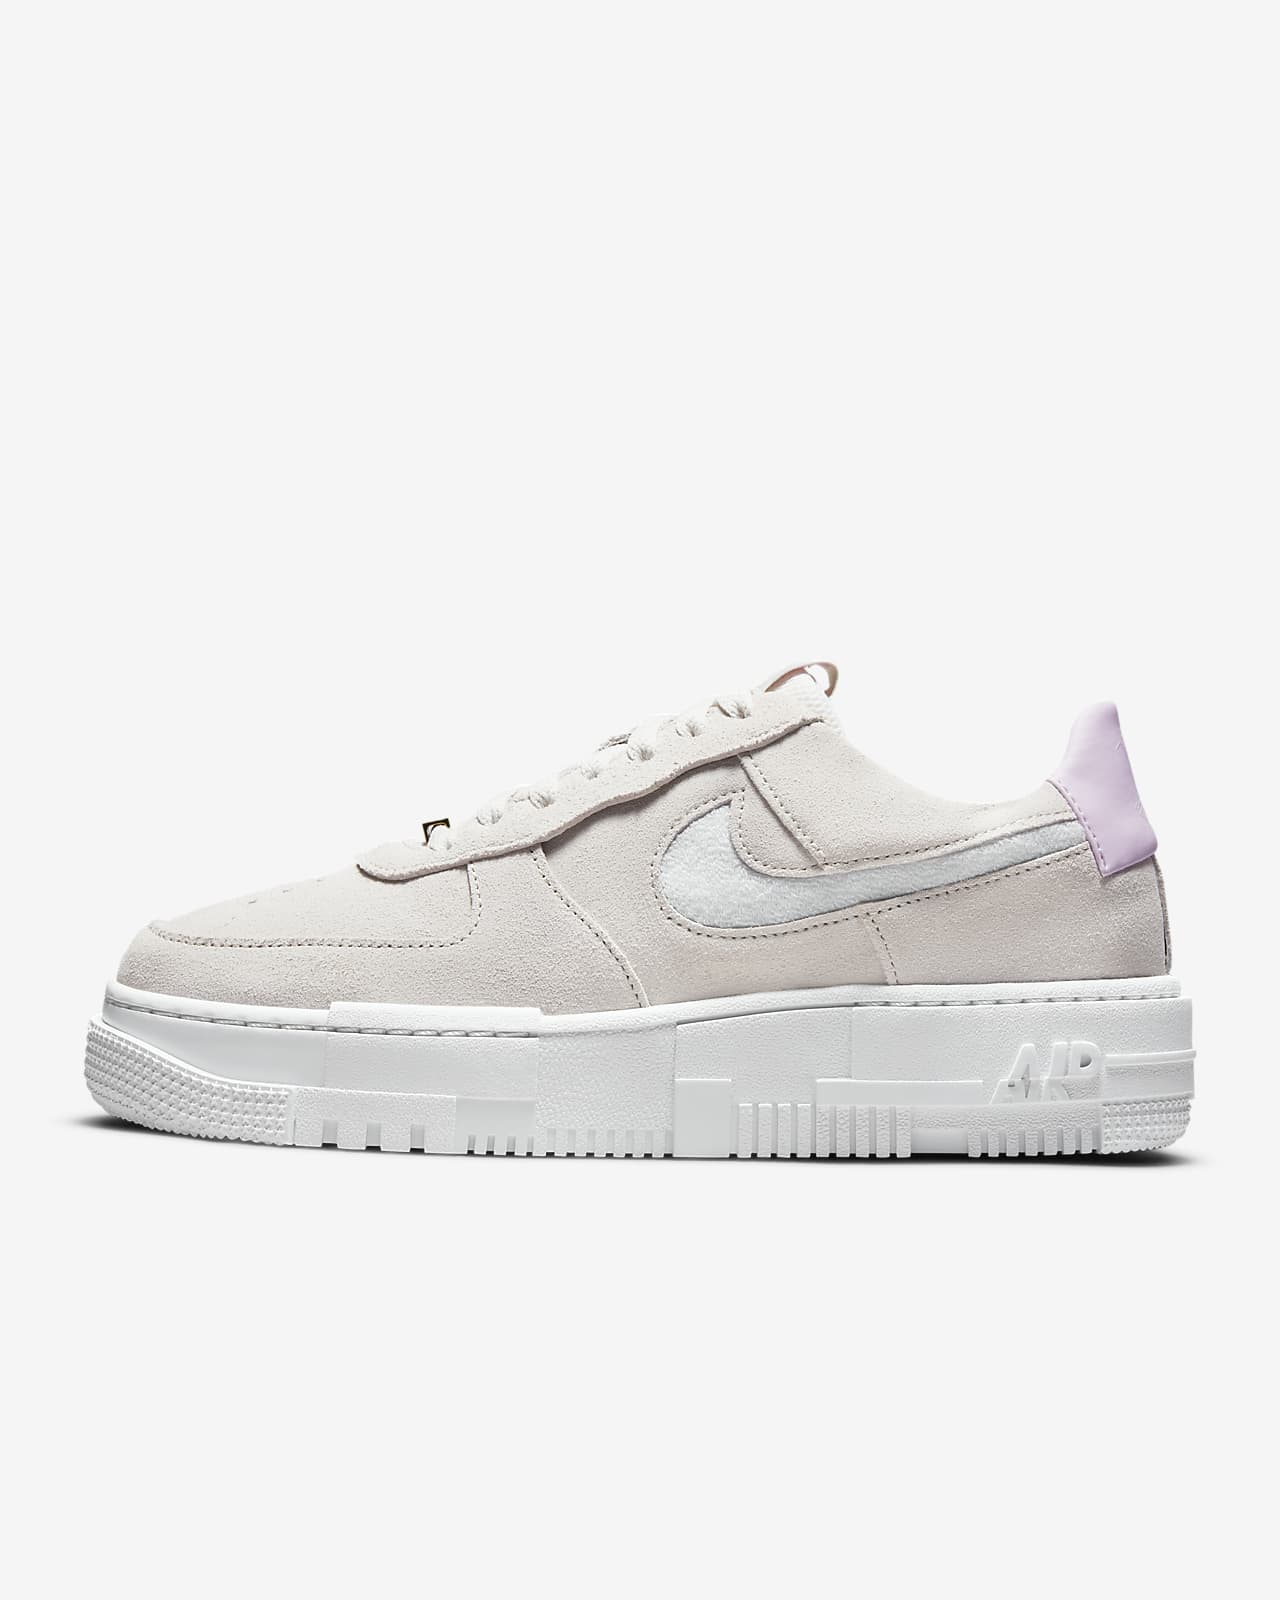 Chaussure Nike Air Force 1 Pixel pour Femme. FR